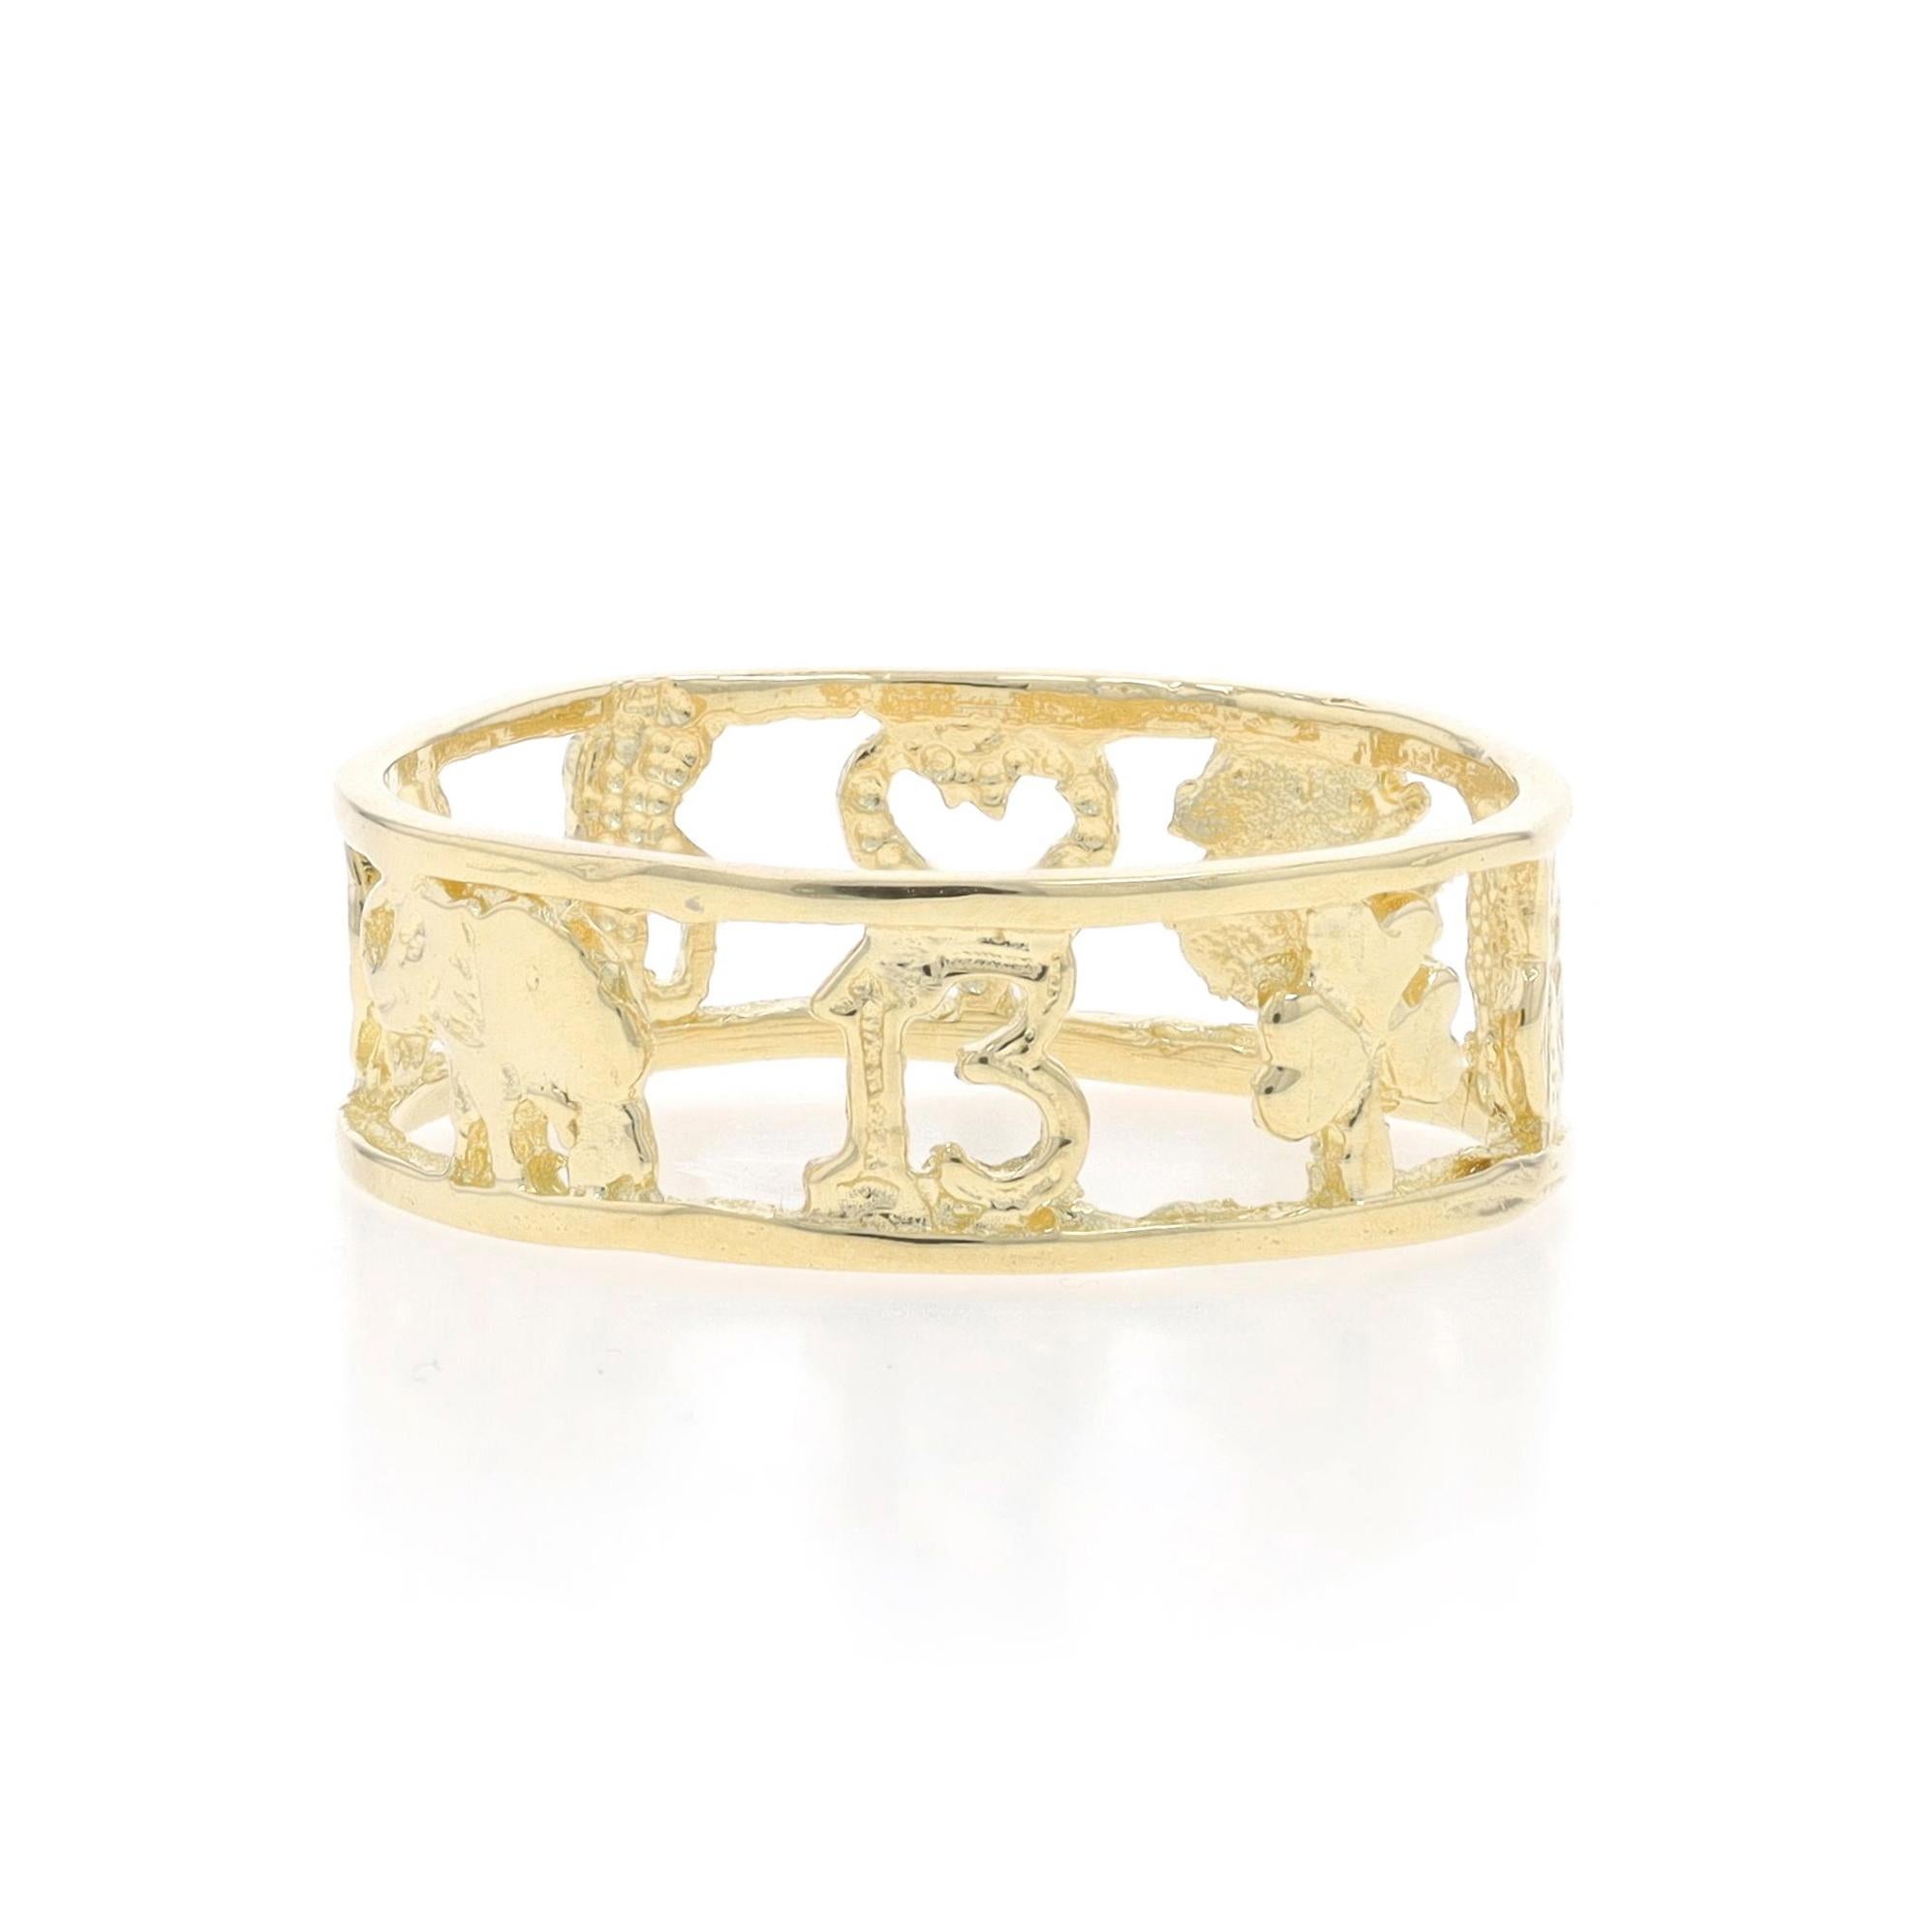 Size: 8 1/2

Metal Content: 14k Yellow Gold

Style: Statement Band
Theme: Good Luck Symbols
Features: Design spans the entire band's perimeter

Measurements

Face Height (north to south): 9/32